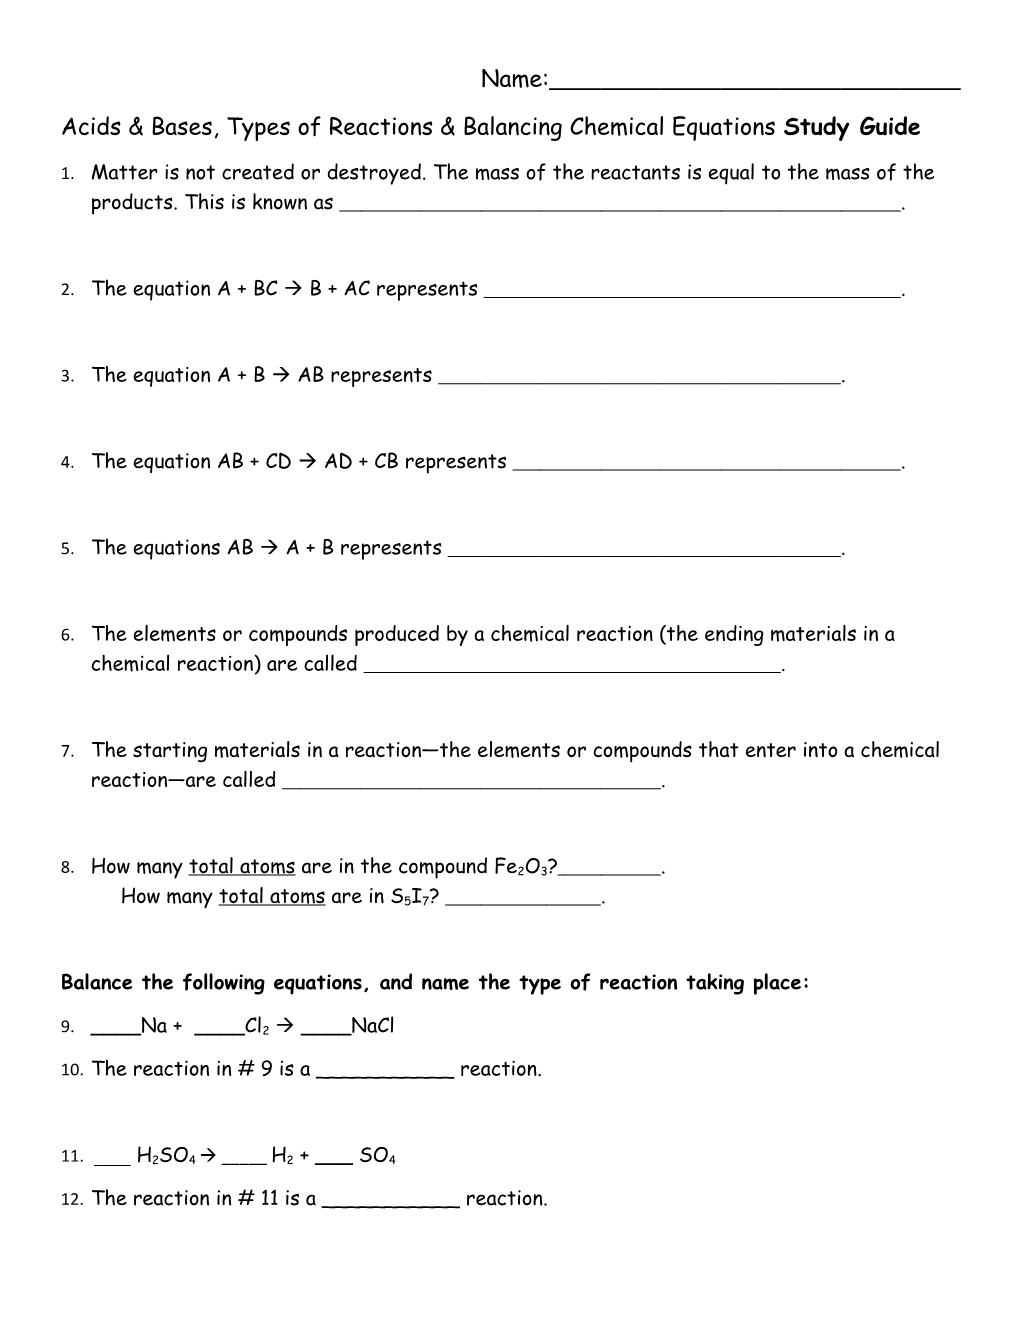 Acids & Bases, Types of Reactions & Balancing Chemical Equations Study Guide